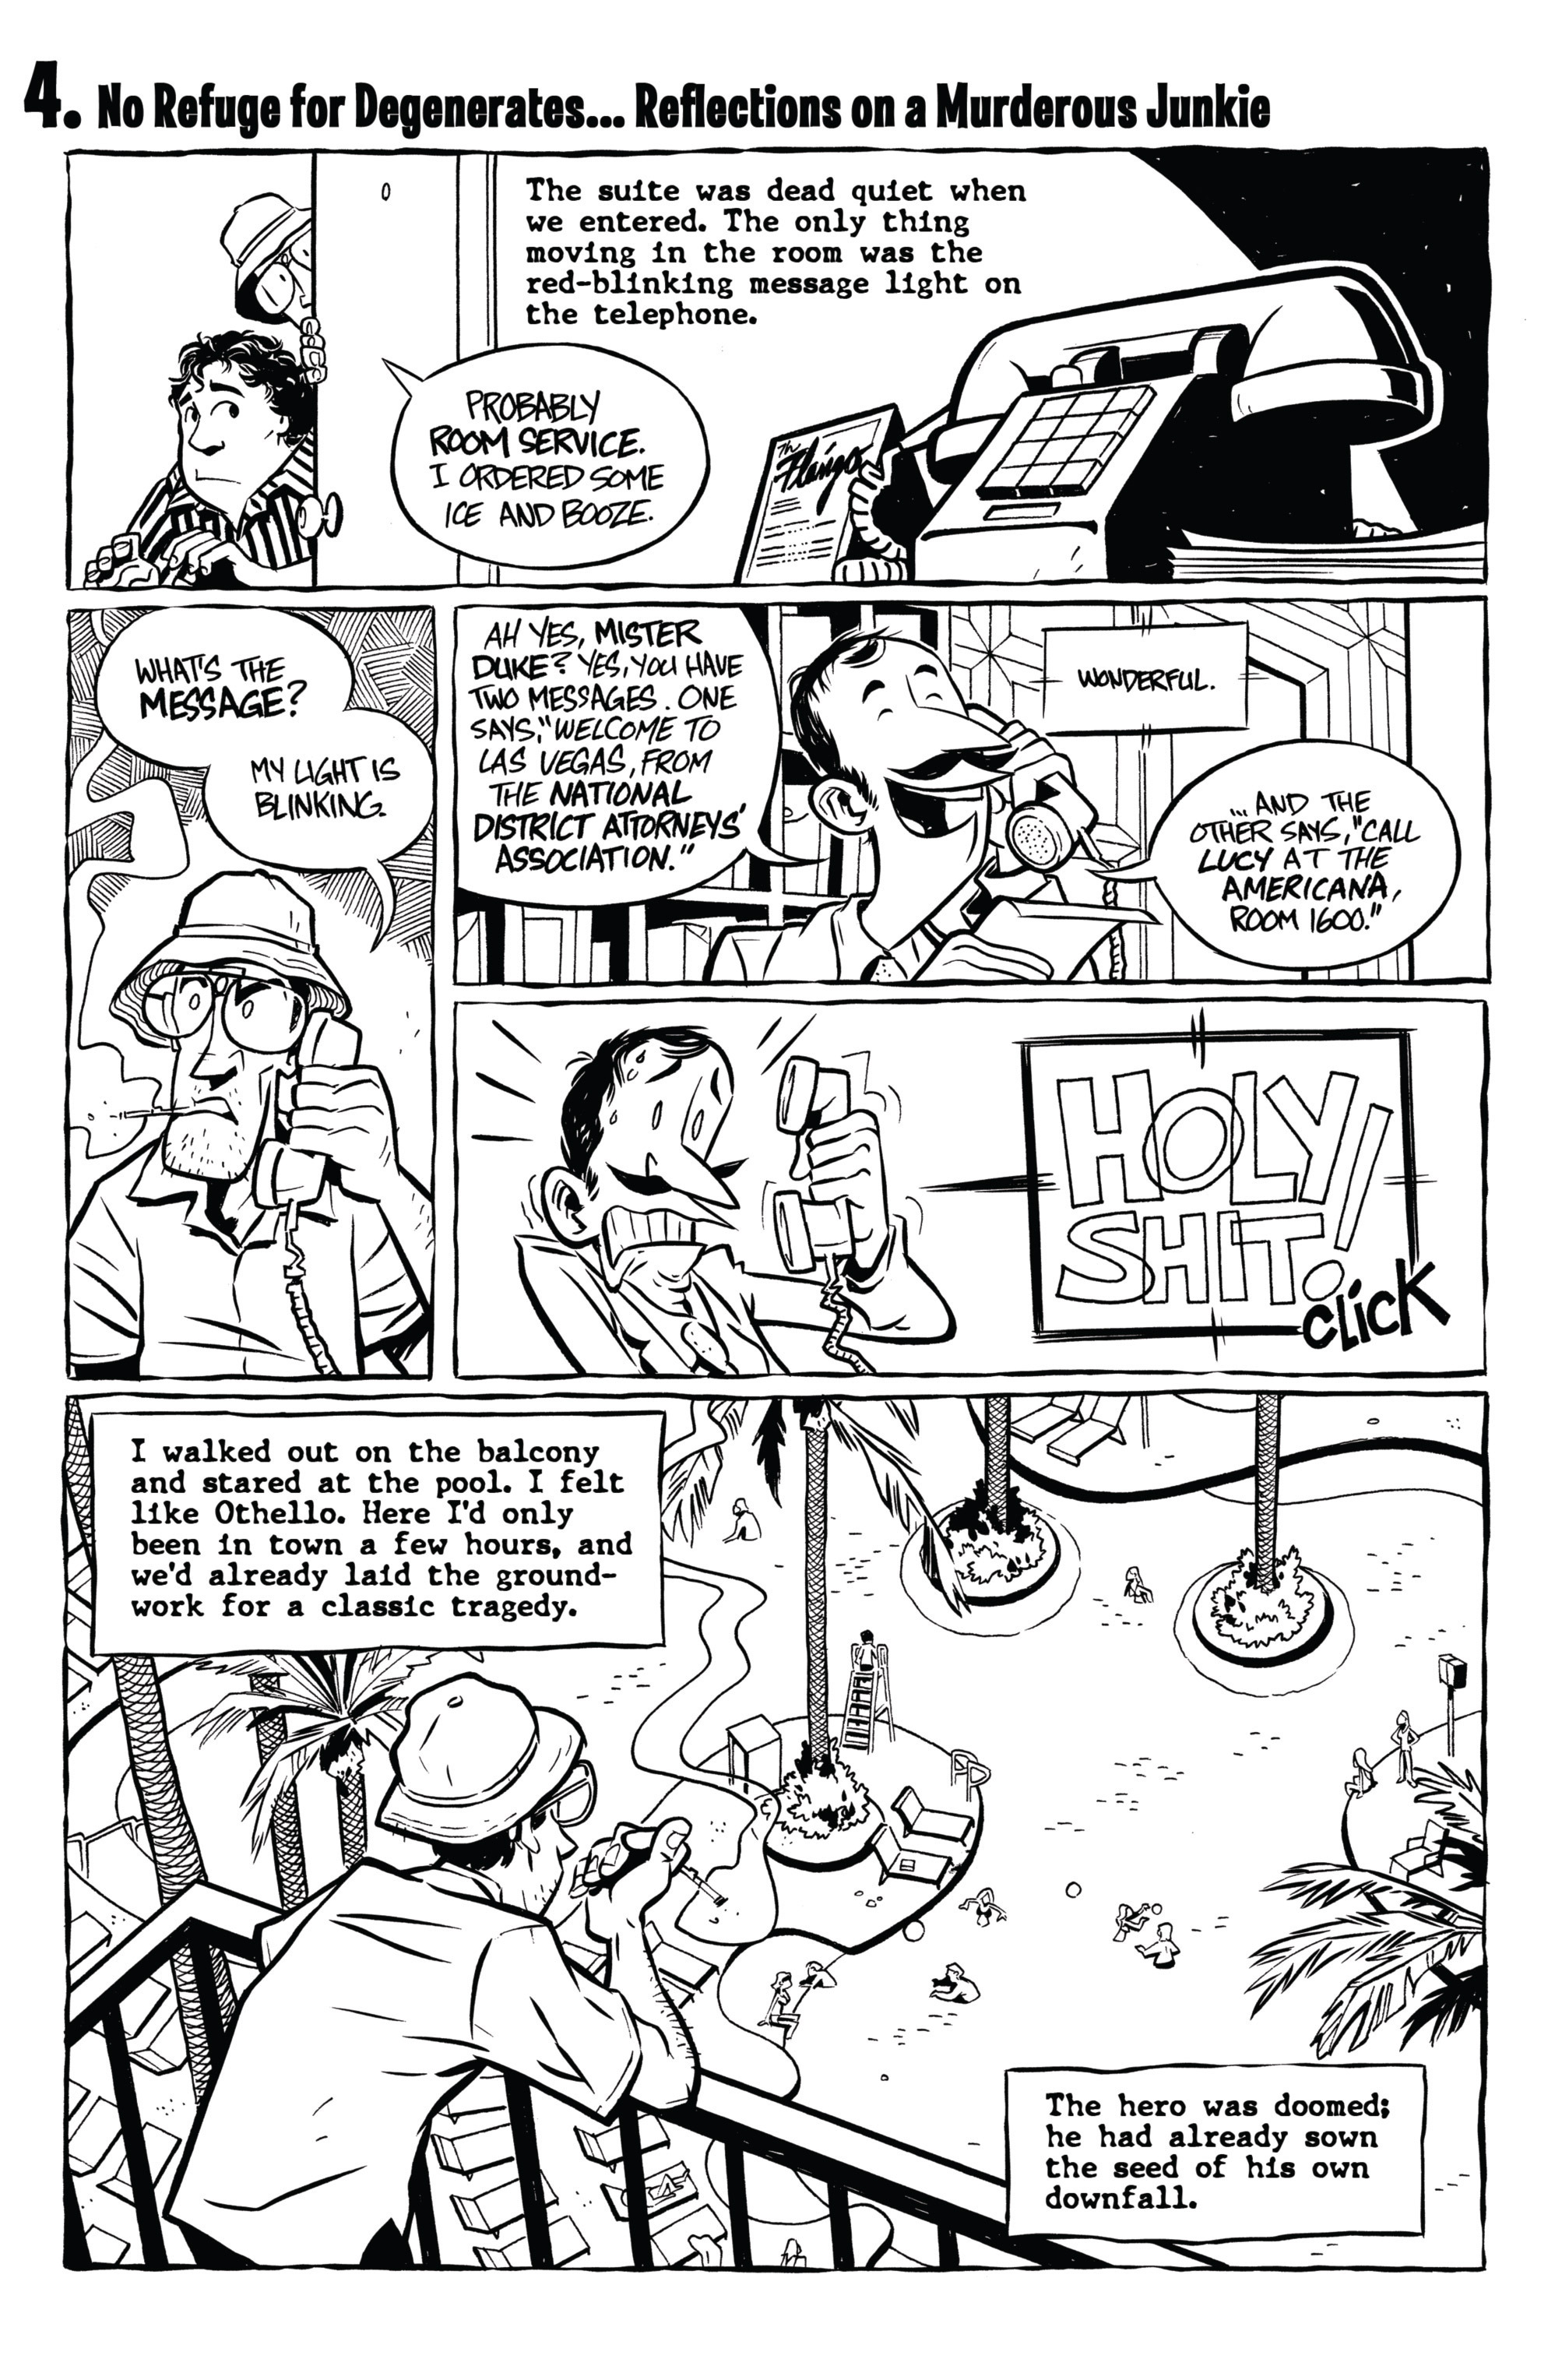 Read online Hunter S. Thompson's Fear and Loathing in Las Vegas comic -  Issue #3 - 28